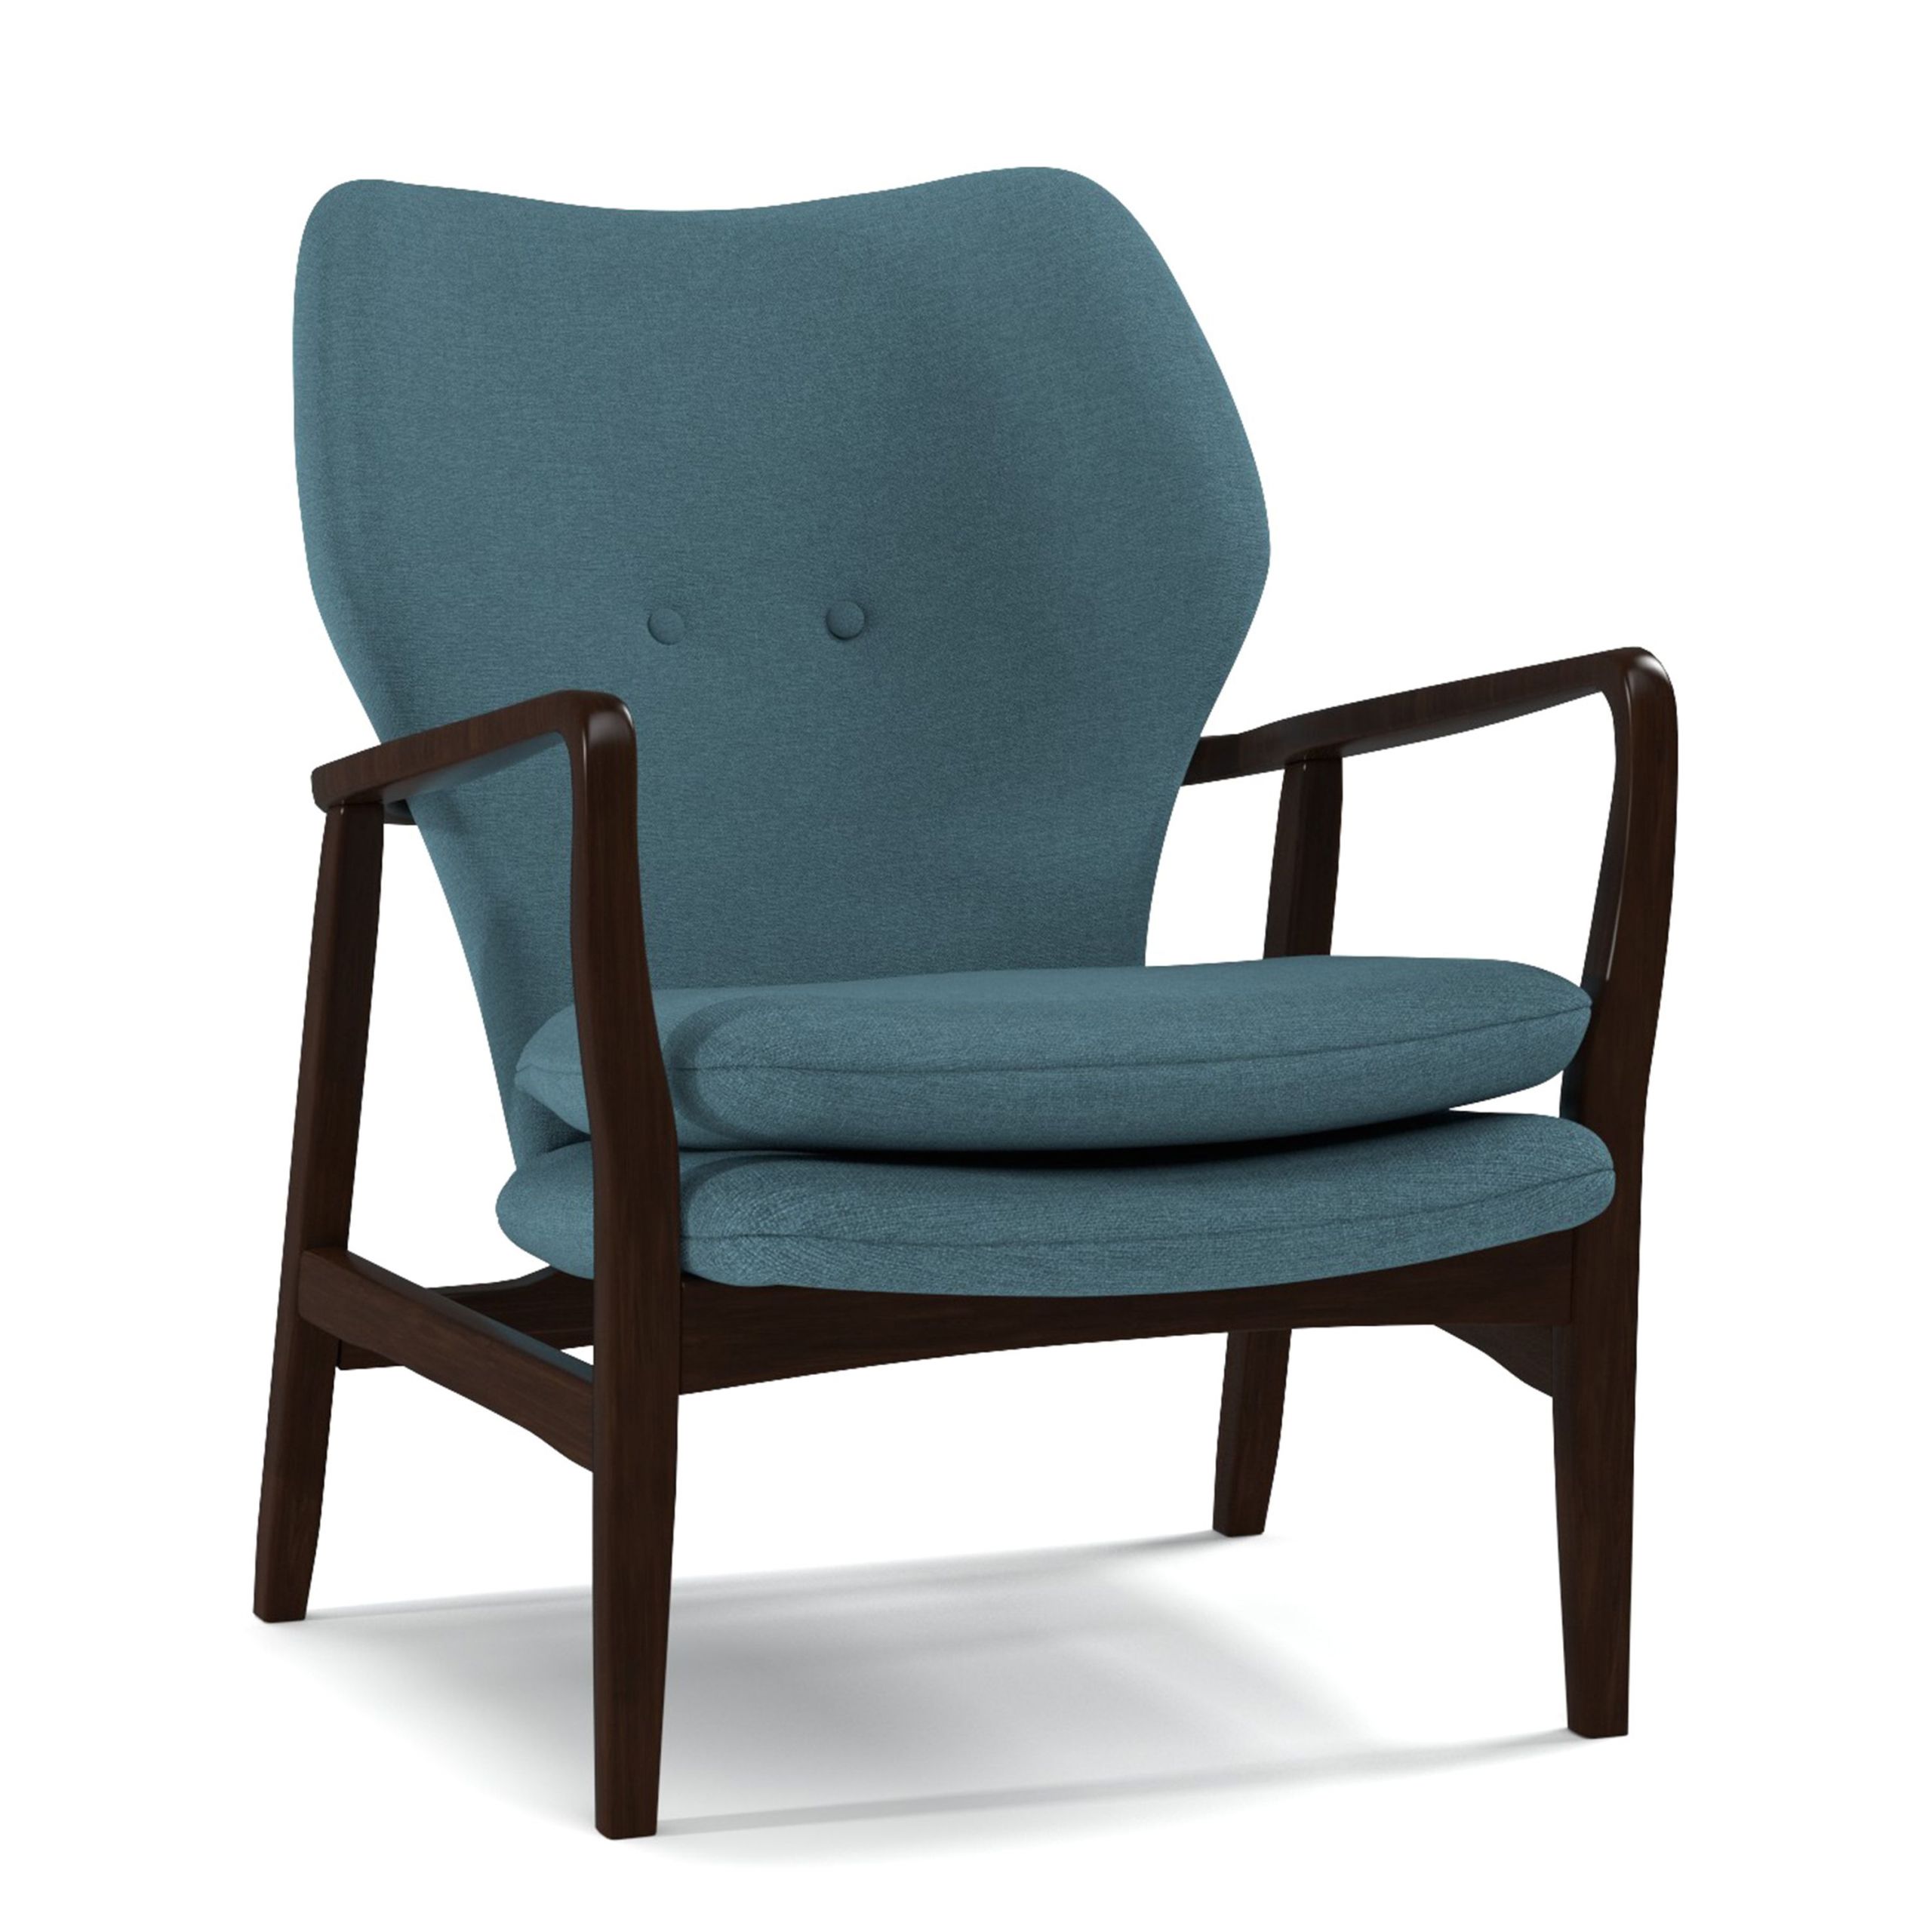 Caribbean Blue Accent Chair with Caribbean Blue Upholstery Peted with A button Back